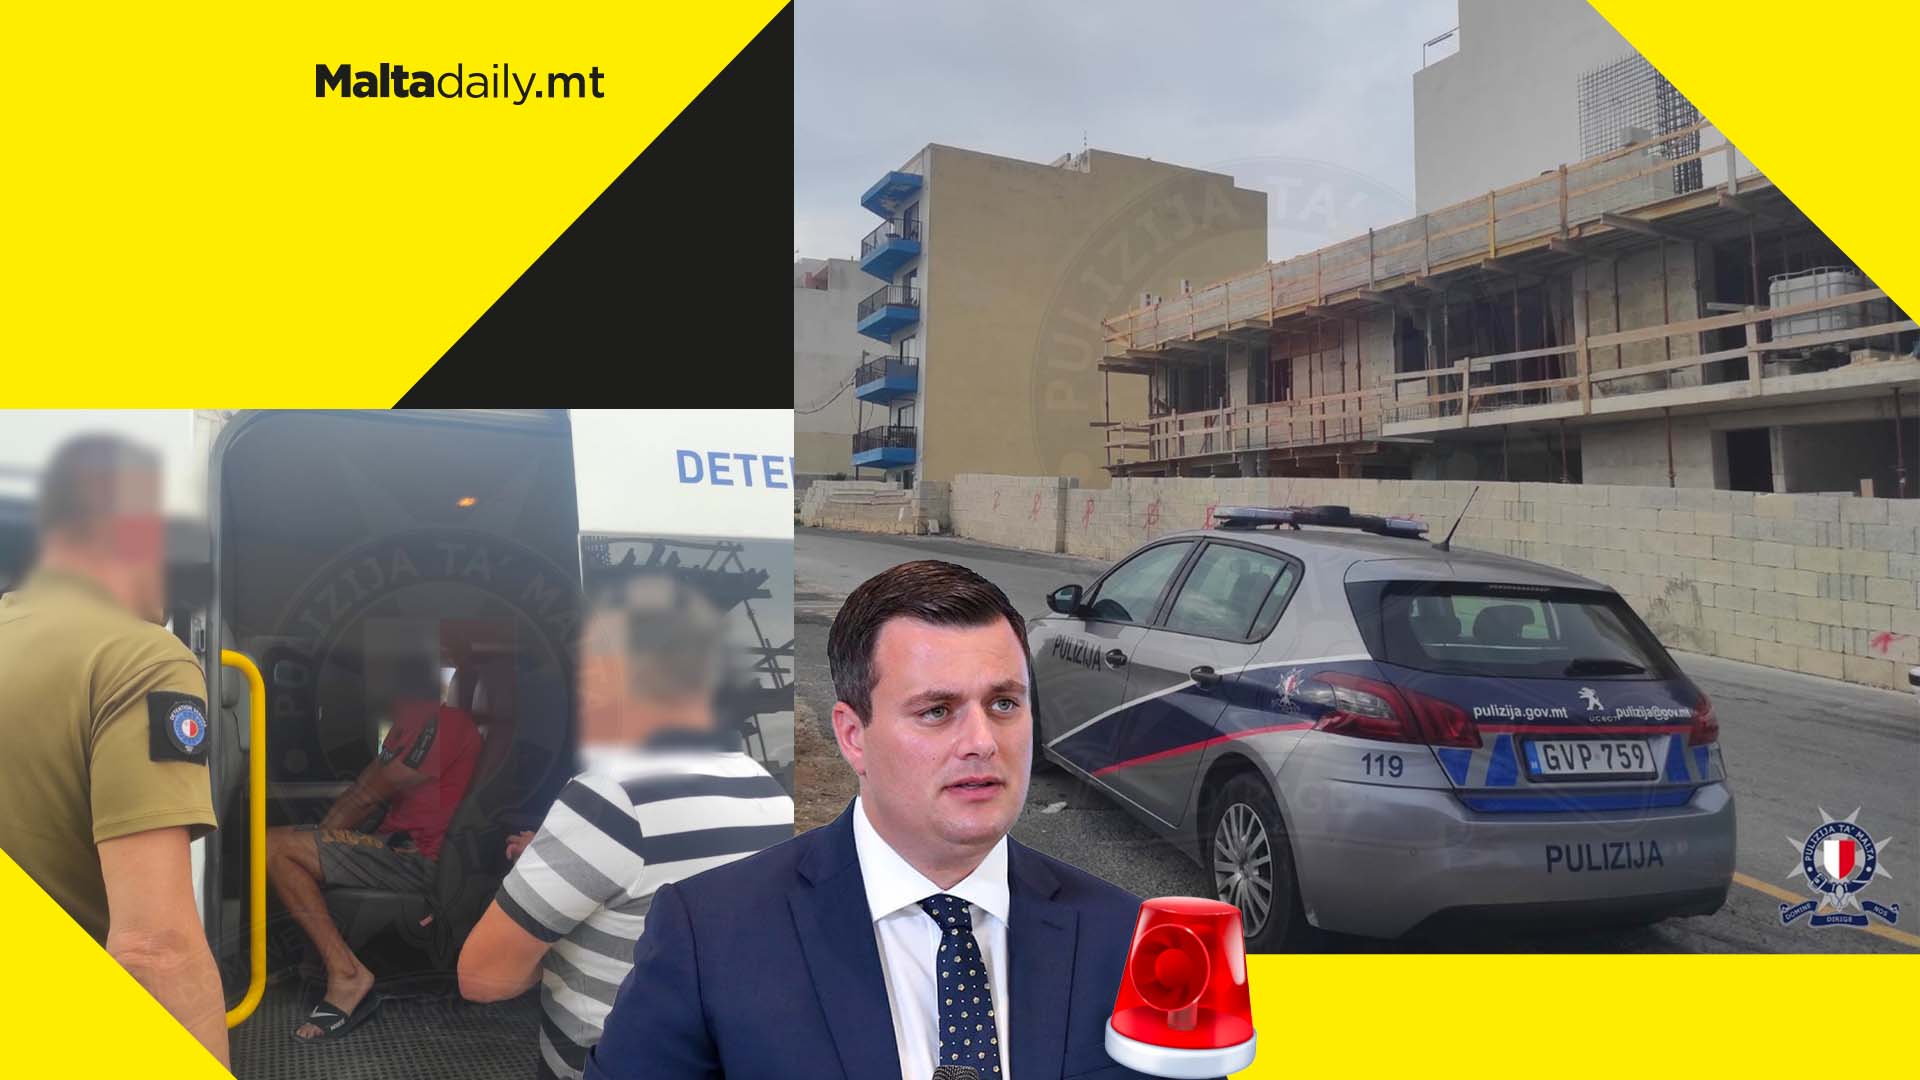 Inspection finds 13 people working and living in Malta irregularly